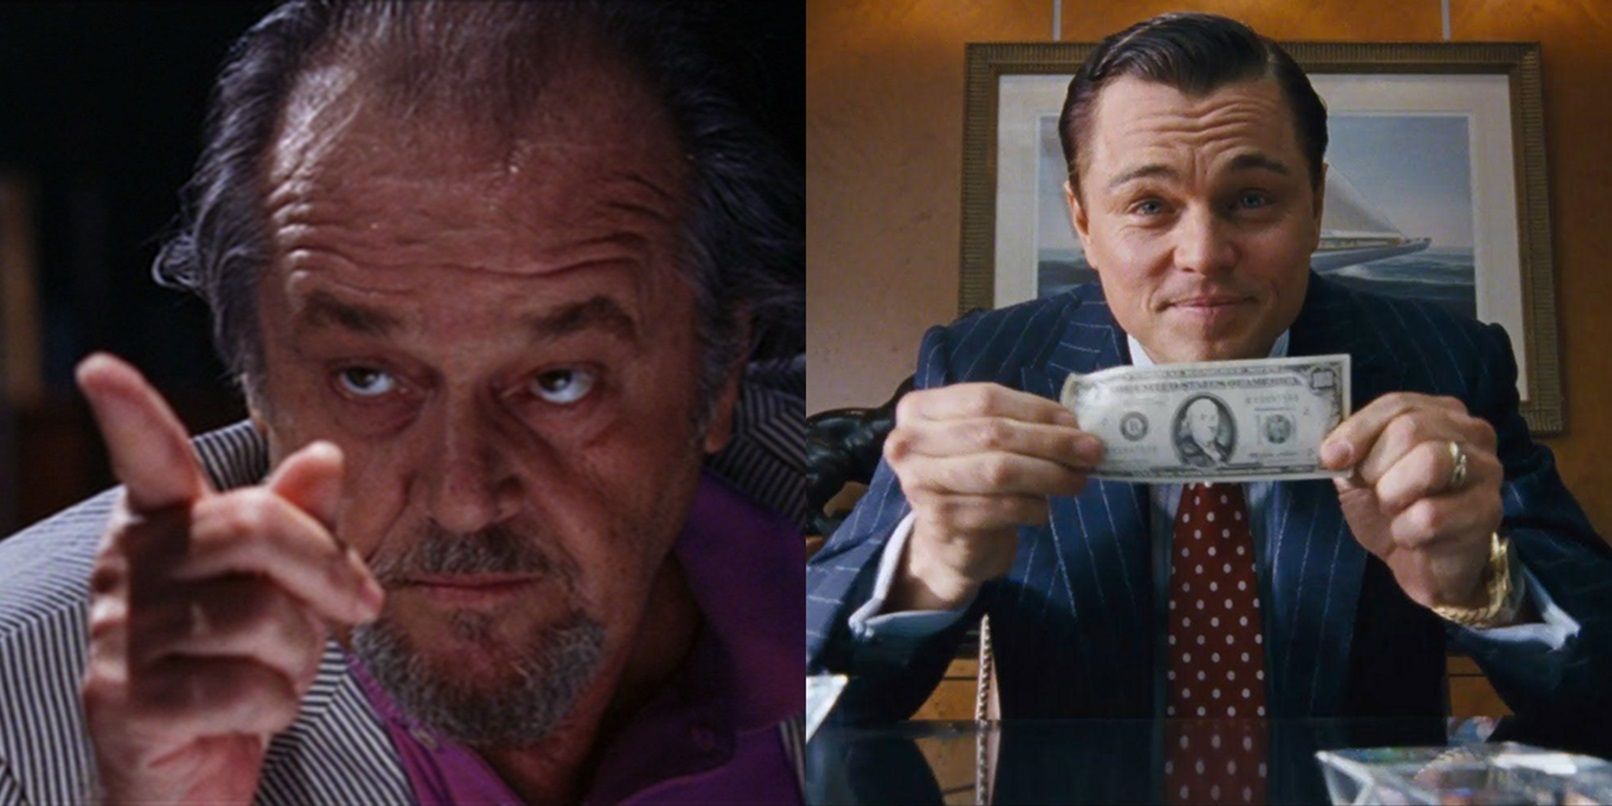 The Departed and The Wolf of Wall Street